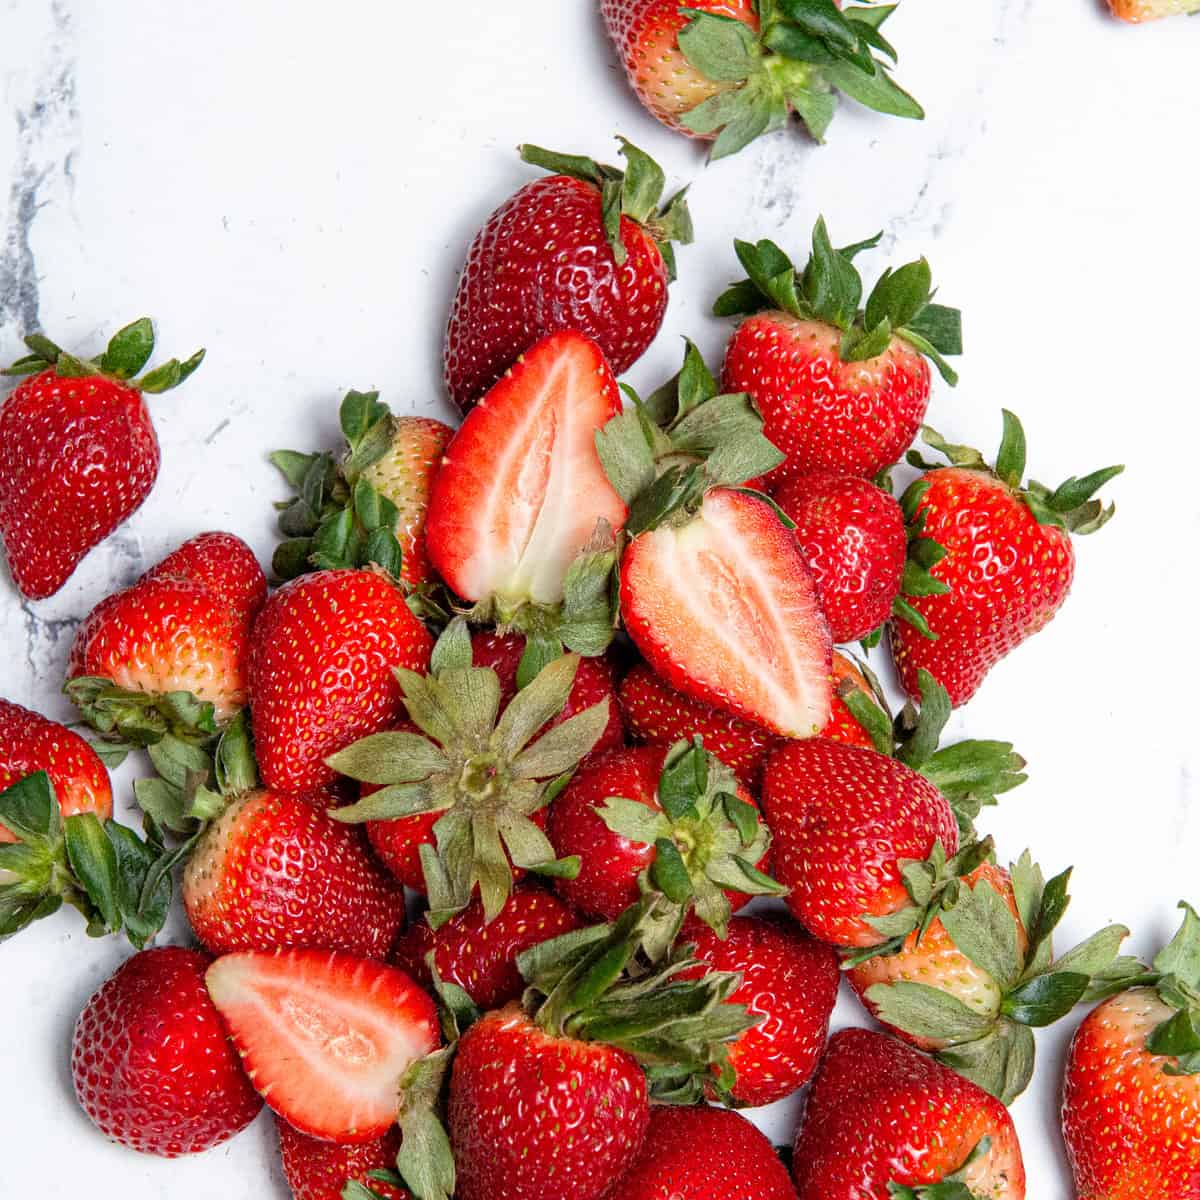 Overhead image of fresh strawberries on a counter top.